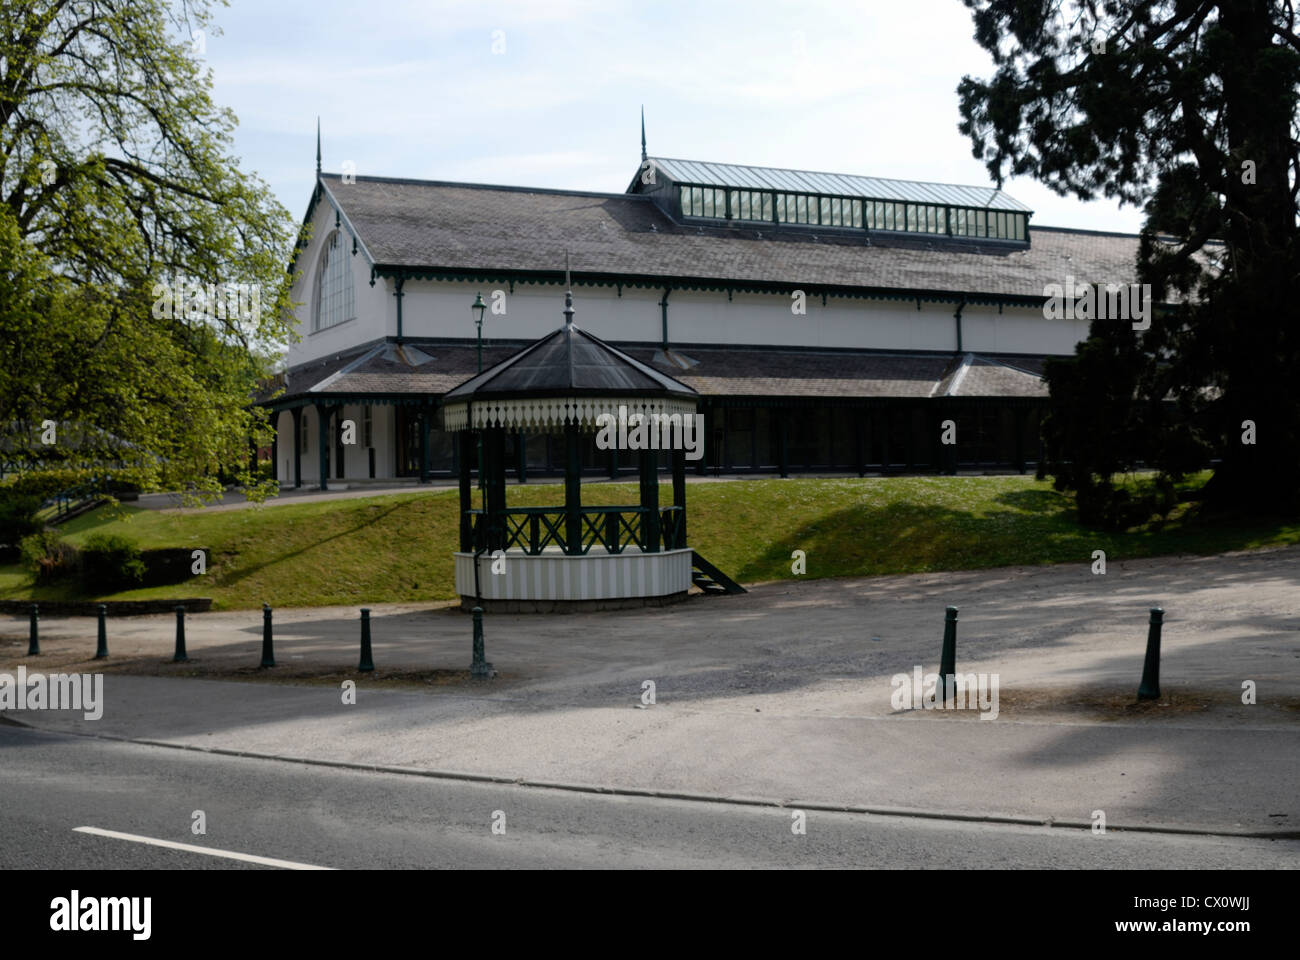 Victorian Pavilion and band stand,Town Center, Strathpeffer,Scotland, Stock Photo